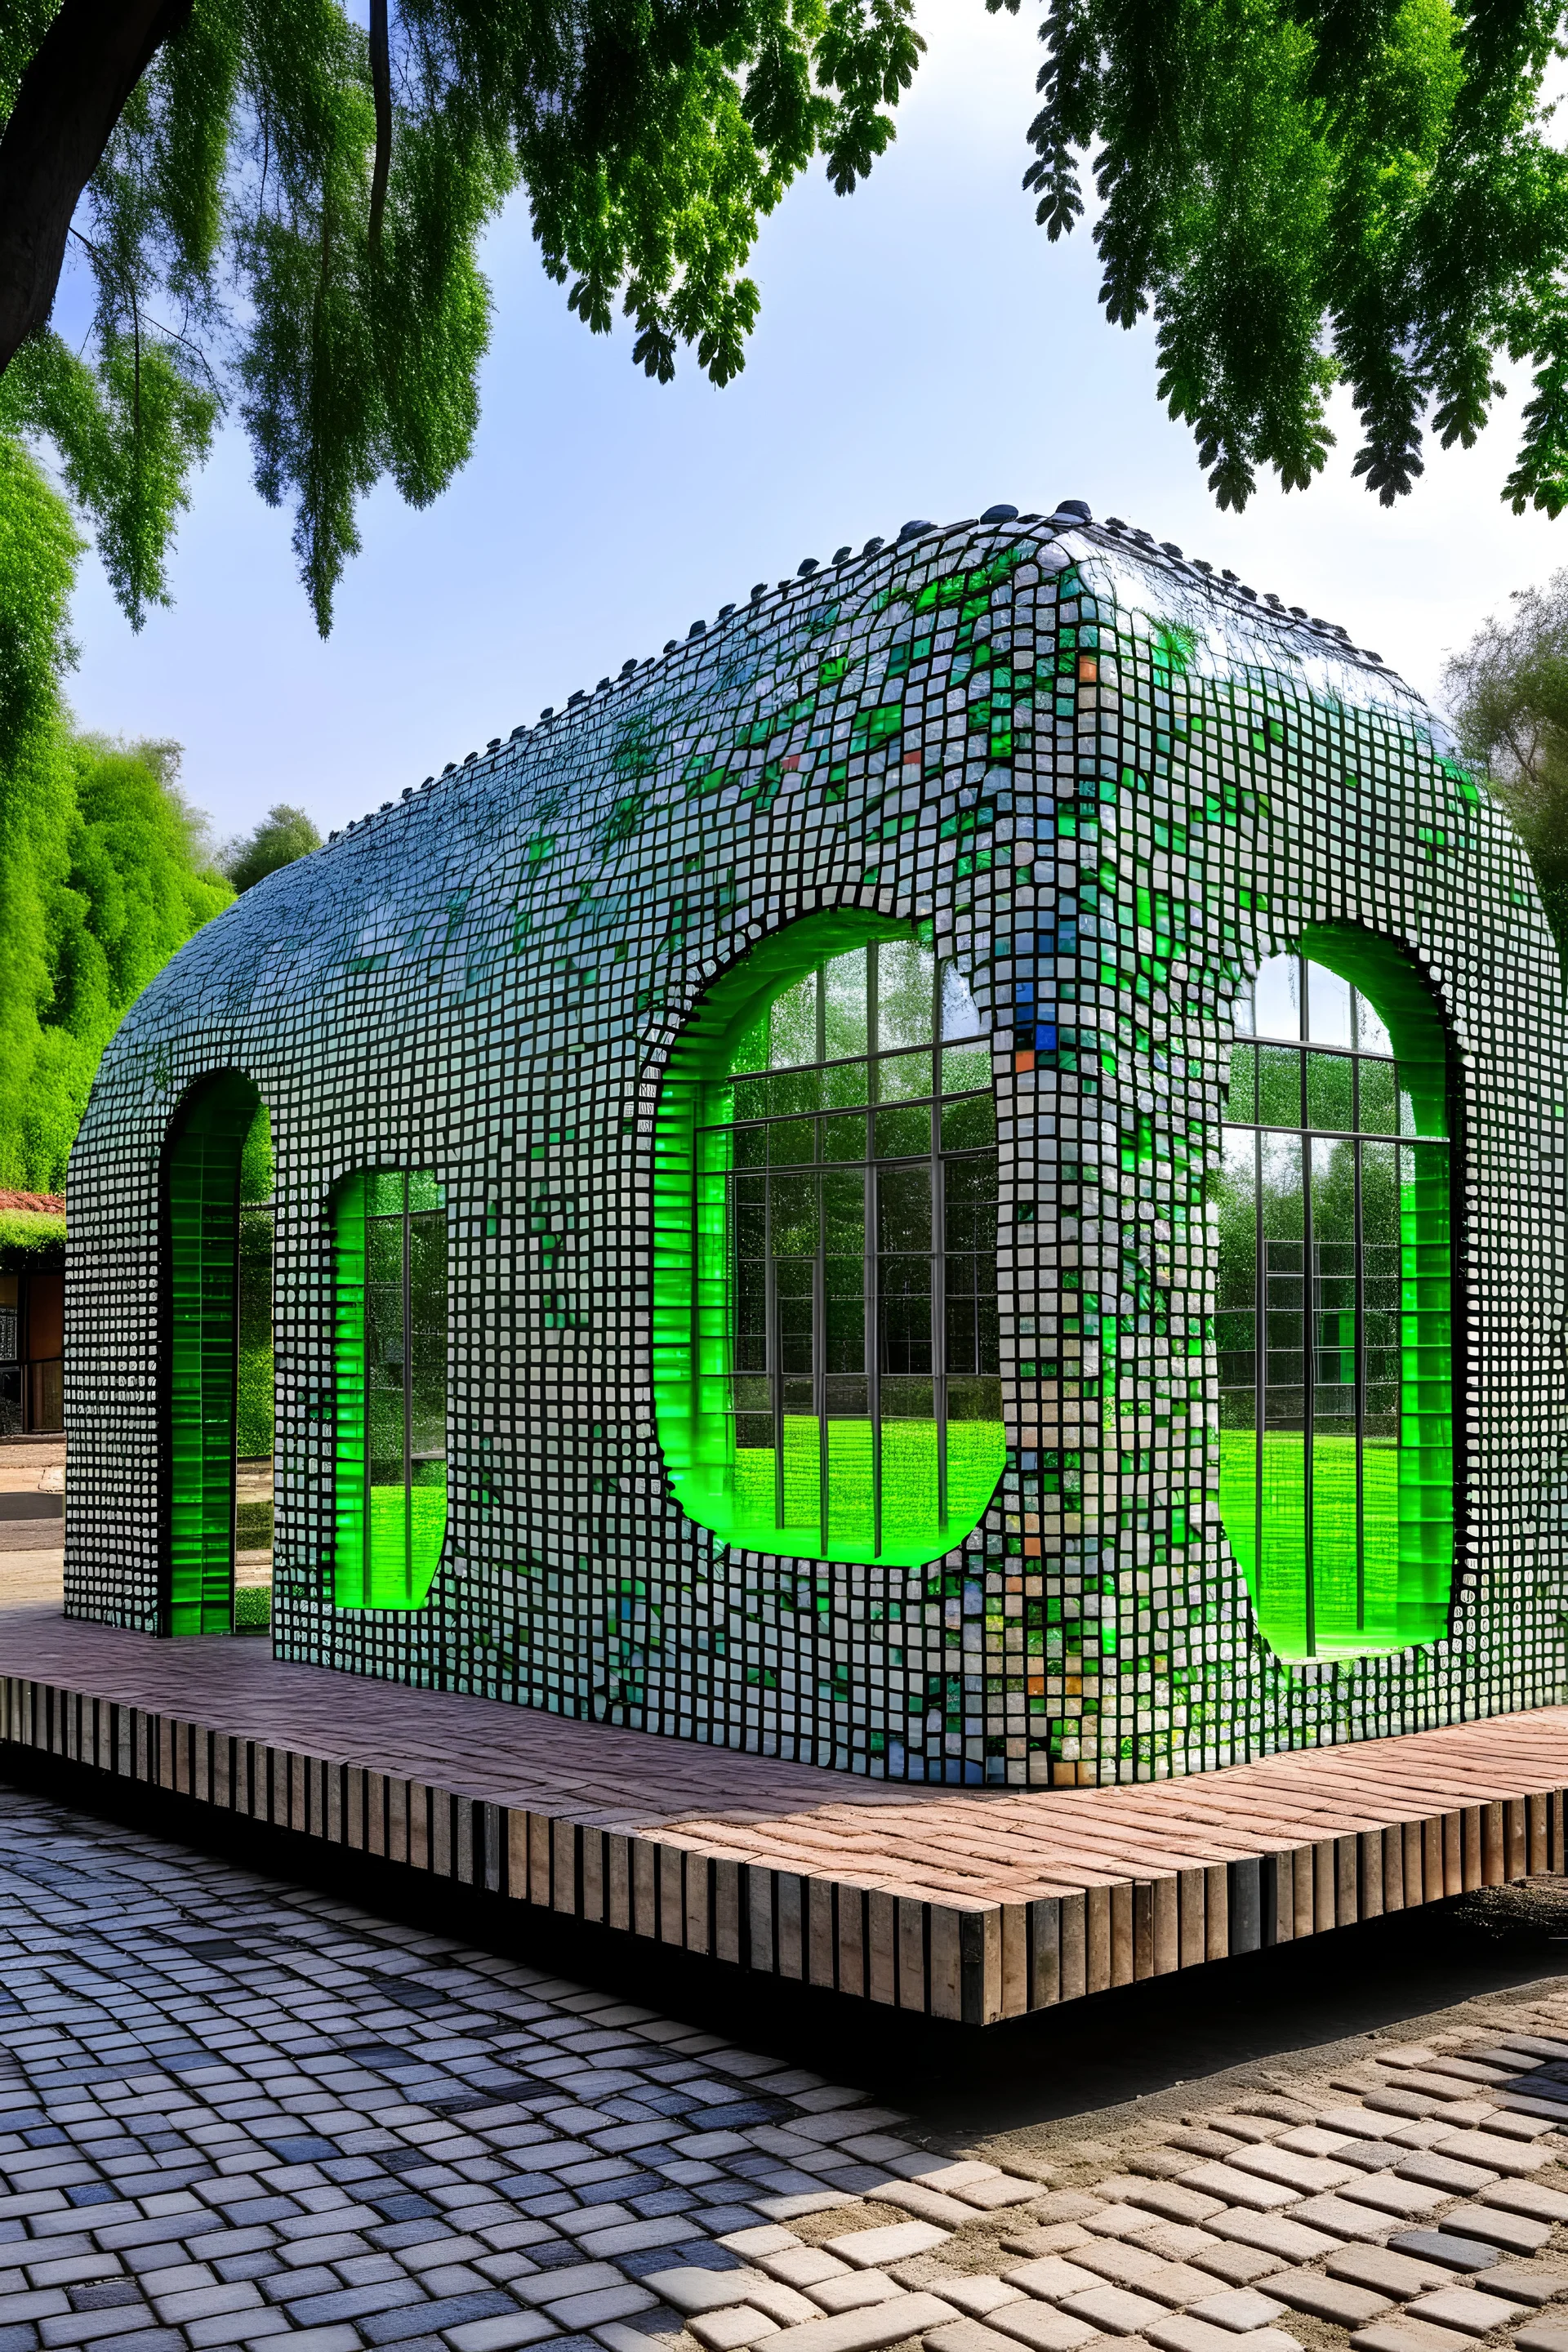 Pavilion made of recycled materials like recycled glass and recycled wood, at a historical site in Mexico, that hosts temporary exhibitions of local and national artists, promoting the art and culture of the region of Puebla. The design needs to be curvilinear and organic